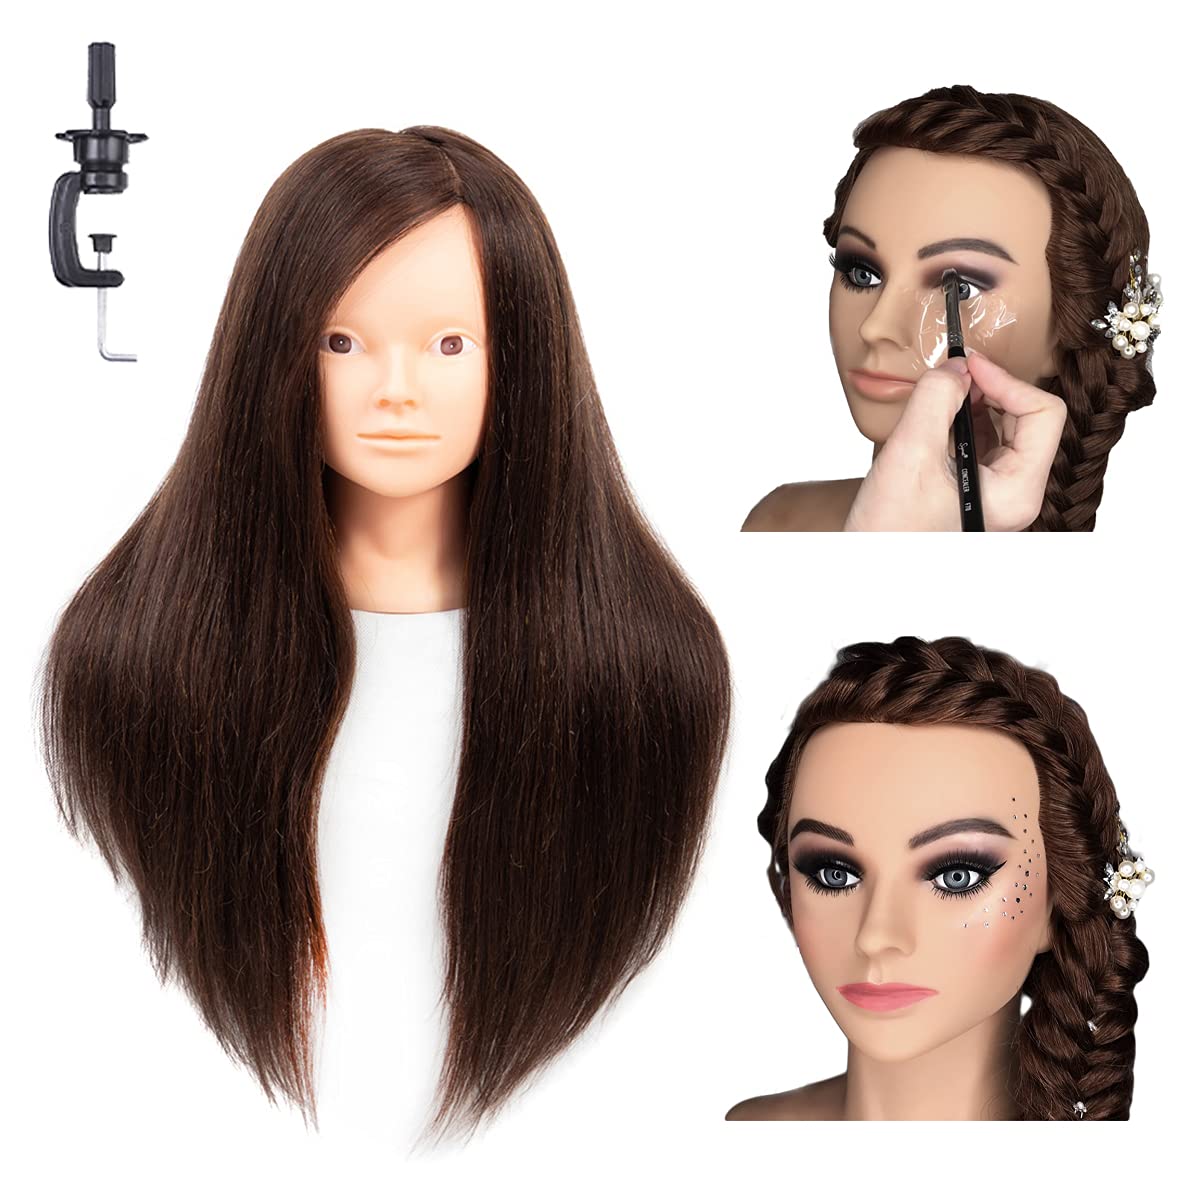 100% Real Hair Mannequin Head With Stand, Perfect For Hair Styling And  Braiding Practice For Hairstylists And Cosmetology Students